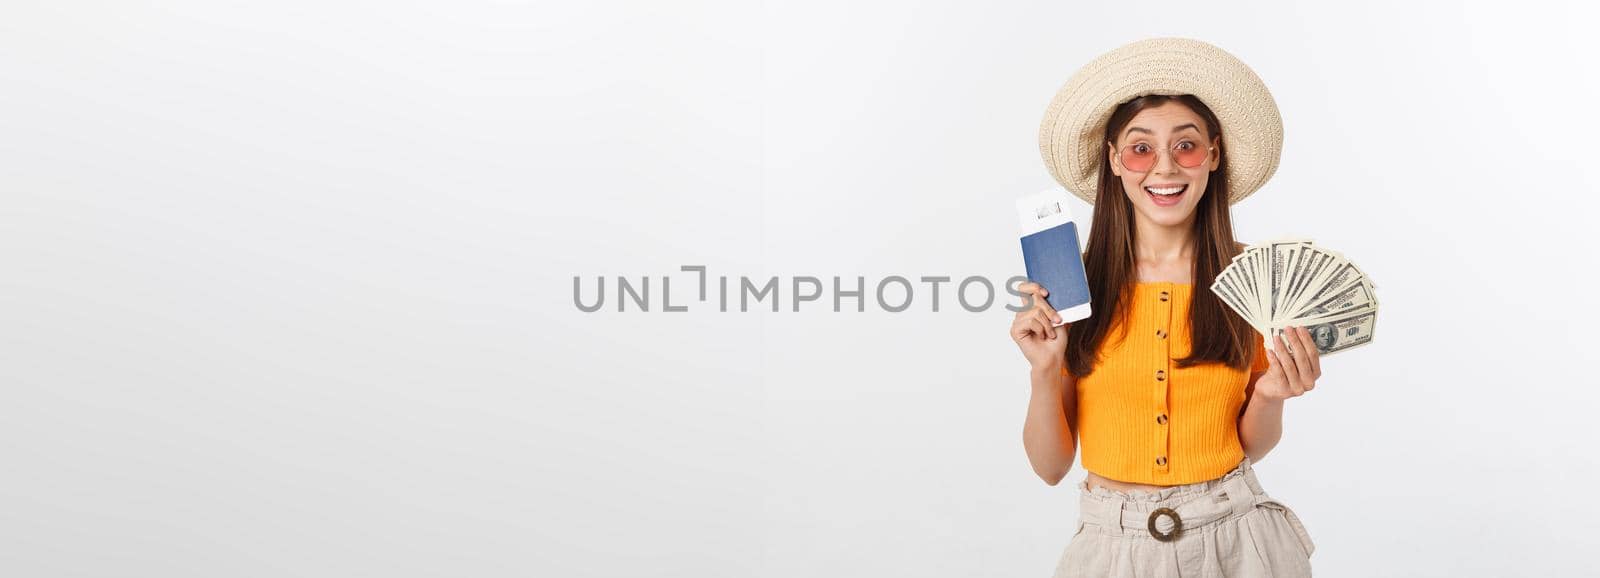 Portrait of cheerful, happy, laughing girl with hat on head, having money fan and passport with tickets in hands, isolated on white background.